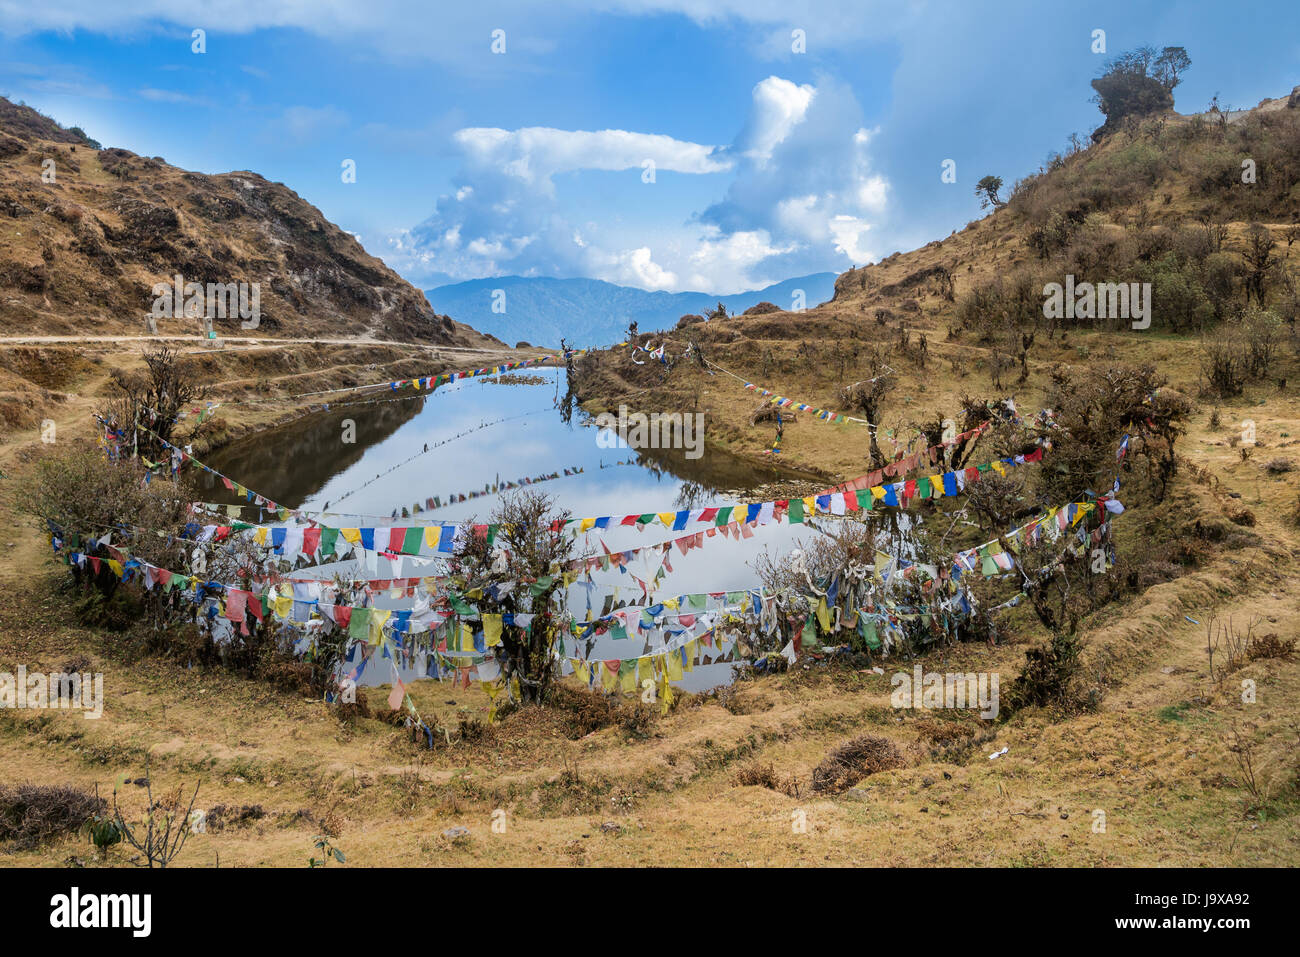 Kala Pokhri, the Black Water Pond with multi-colored prayer flags flung across, on the trekking route to Sandakphu inside the Singalila National Park, Stock Photo